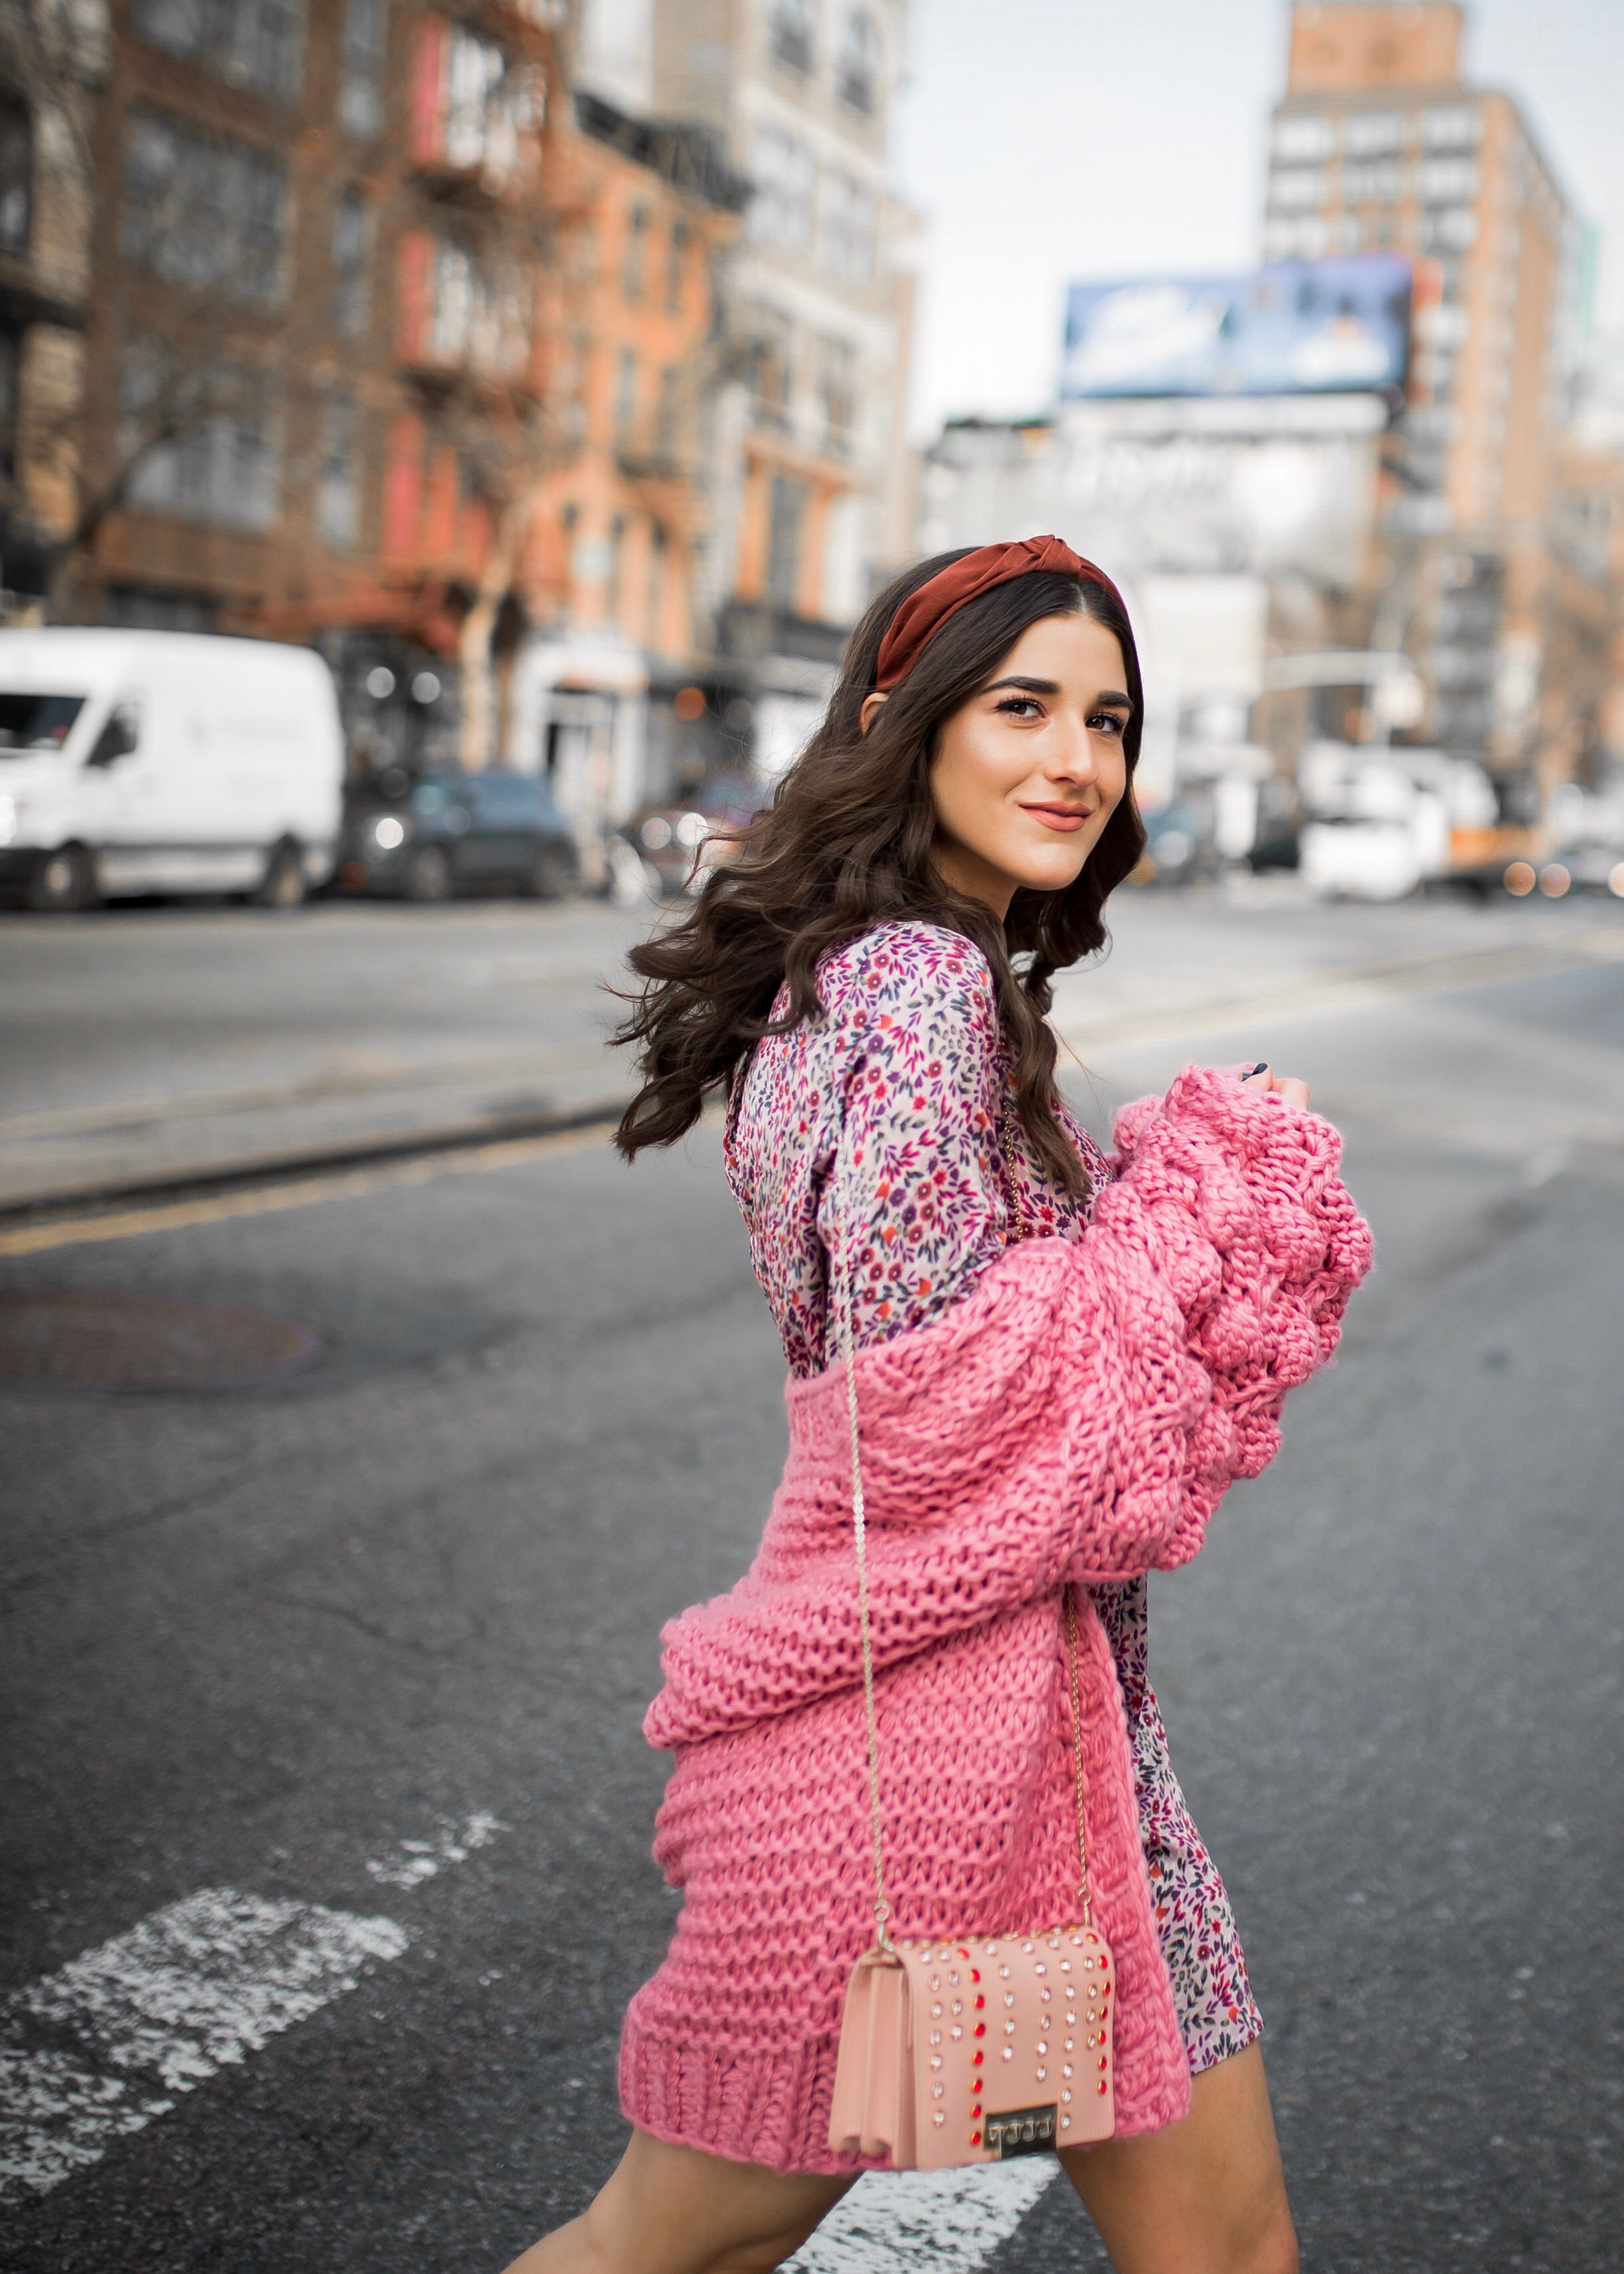 How Being In A Miserable Job Shaped My Entire Career Silk Floral Dress + Pink Pom Pom Sweater Esther Santer Fashion Blog NYC Street Style Blogger Outfit OOTD Trendy Shopping Mango Sale Winter How To Wear Maroon Velvet Booties Zac Posen  Swarovski Bag.jpg